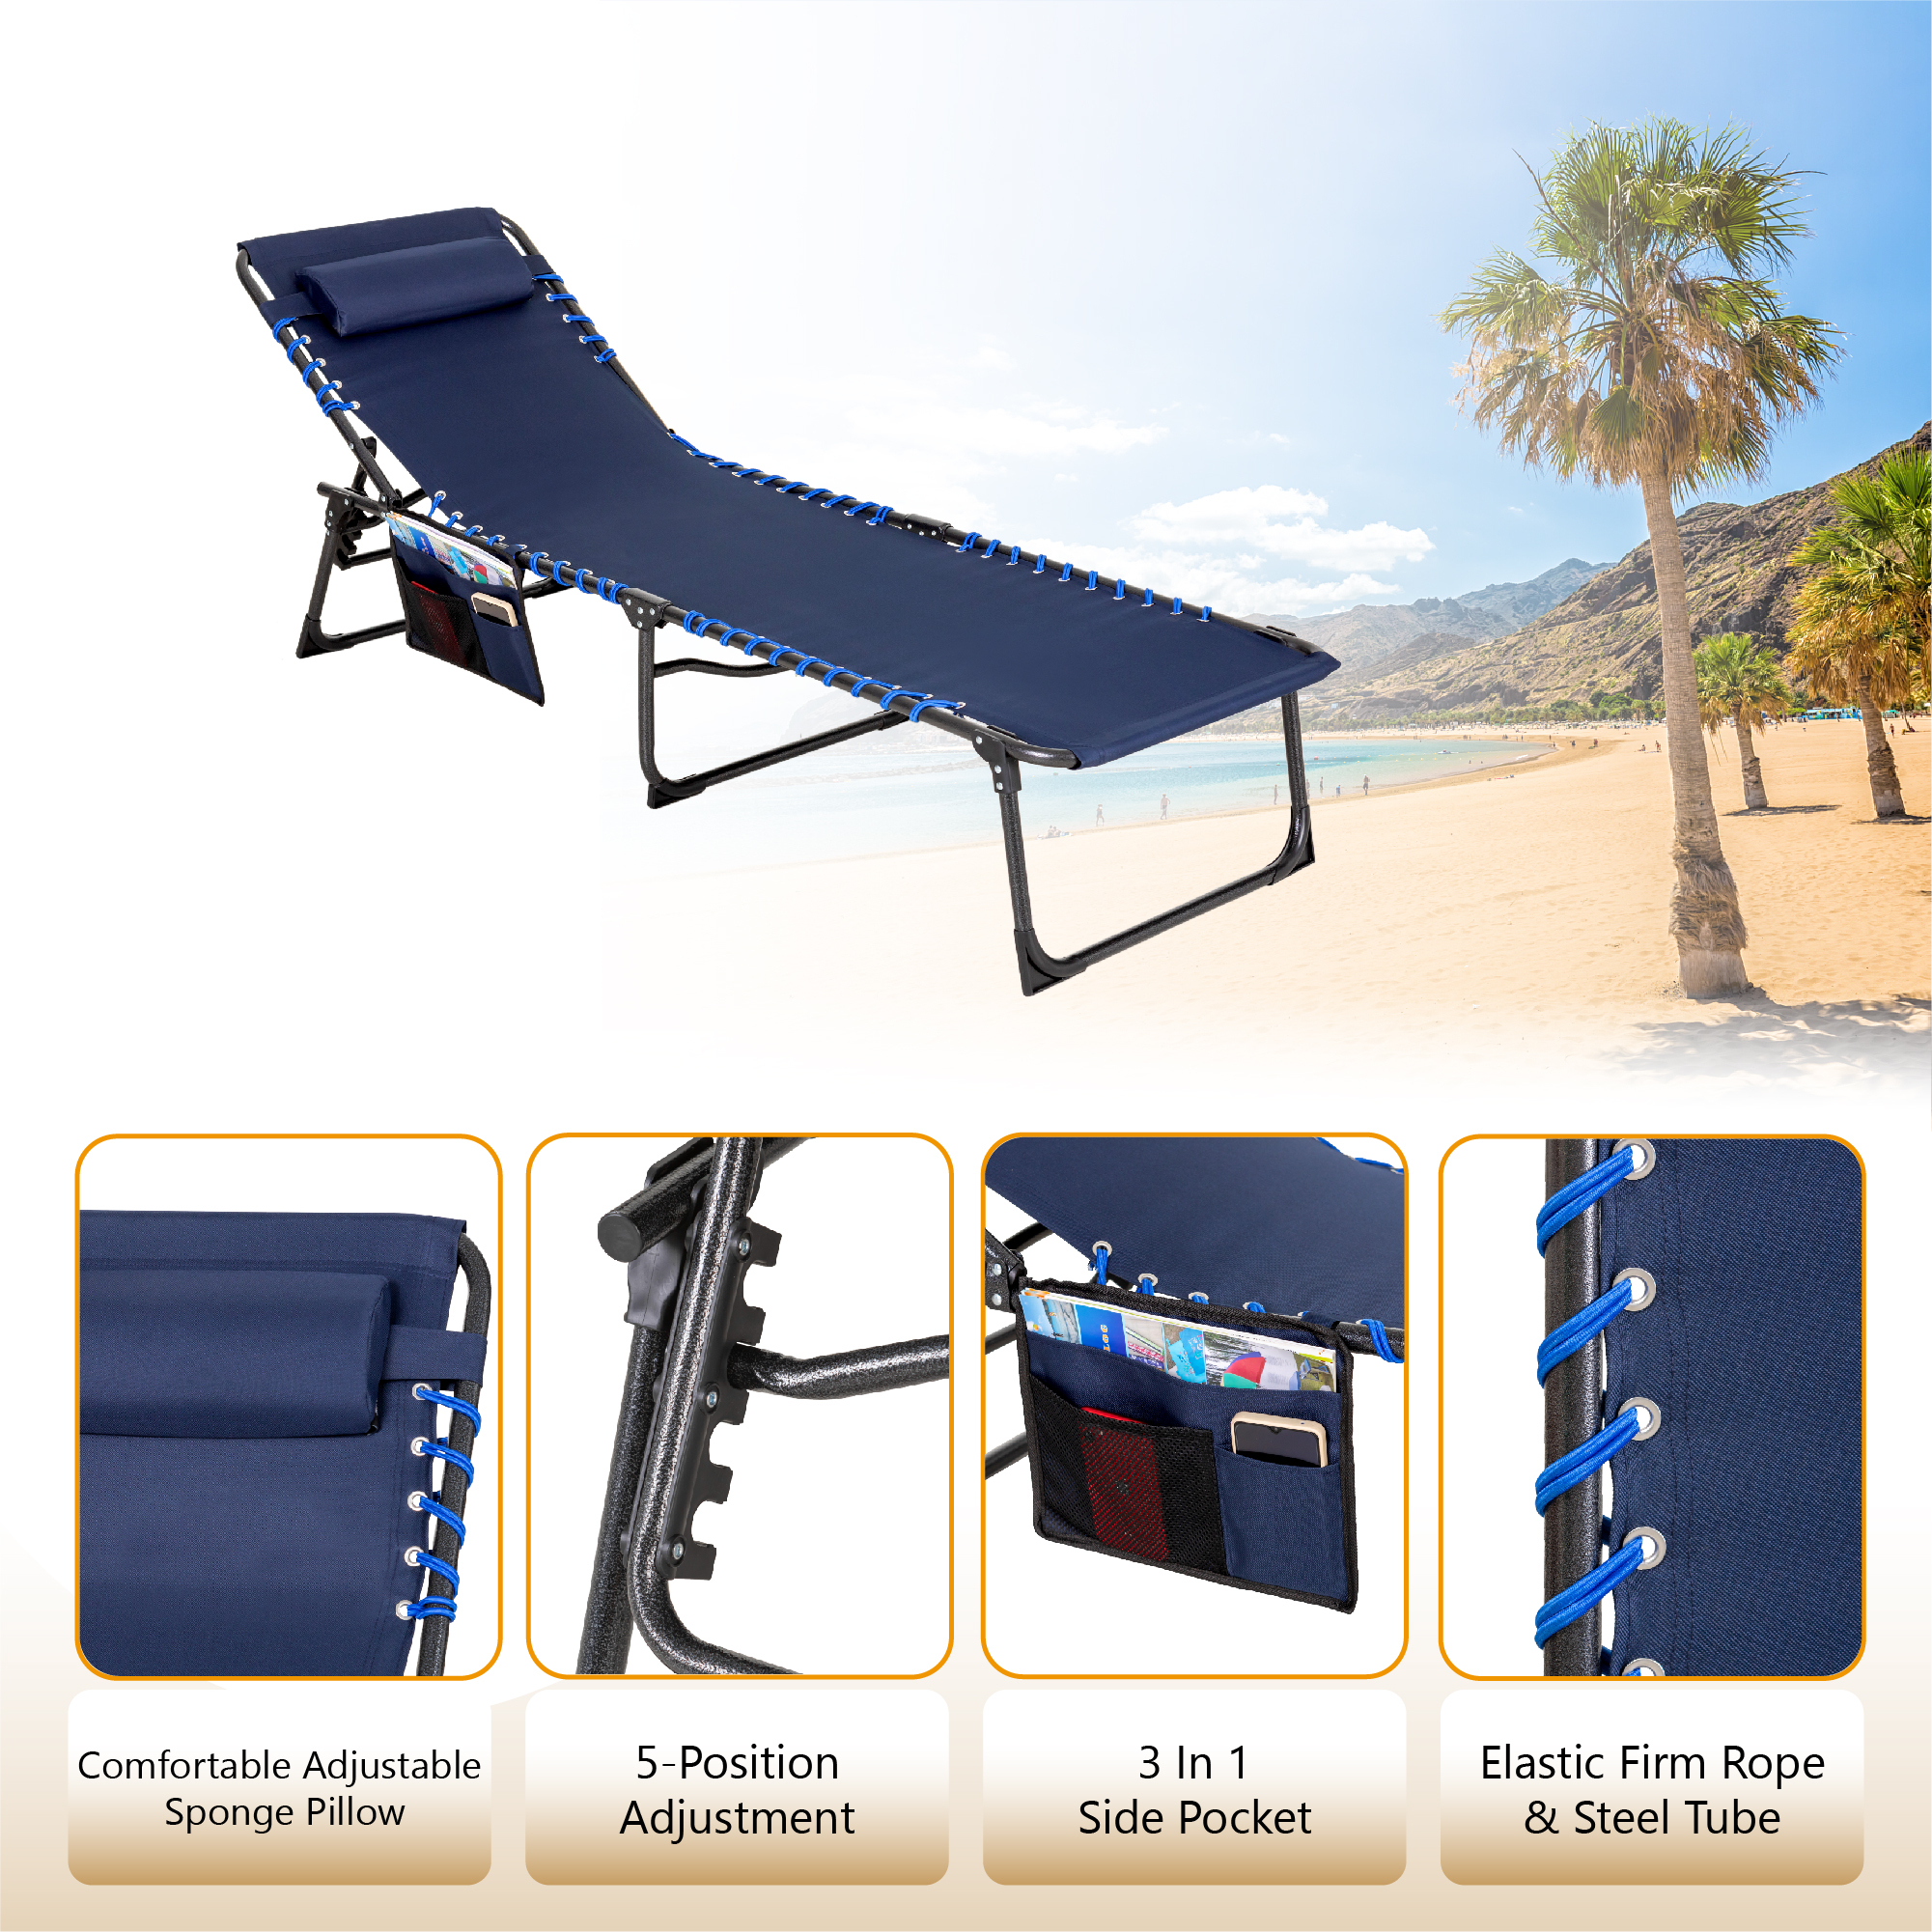 Alpha Camper Folding Chair with W/Pillow & 5 Position Adjustable Backrest for Patio, Camping, and Poolside, Navy - image 5 of 11